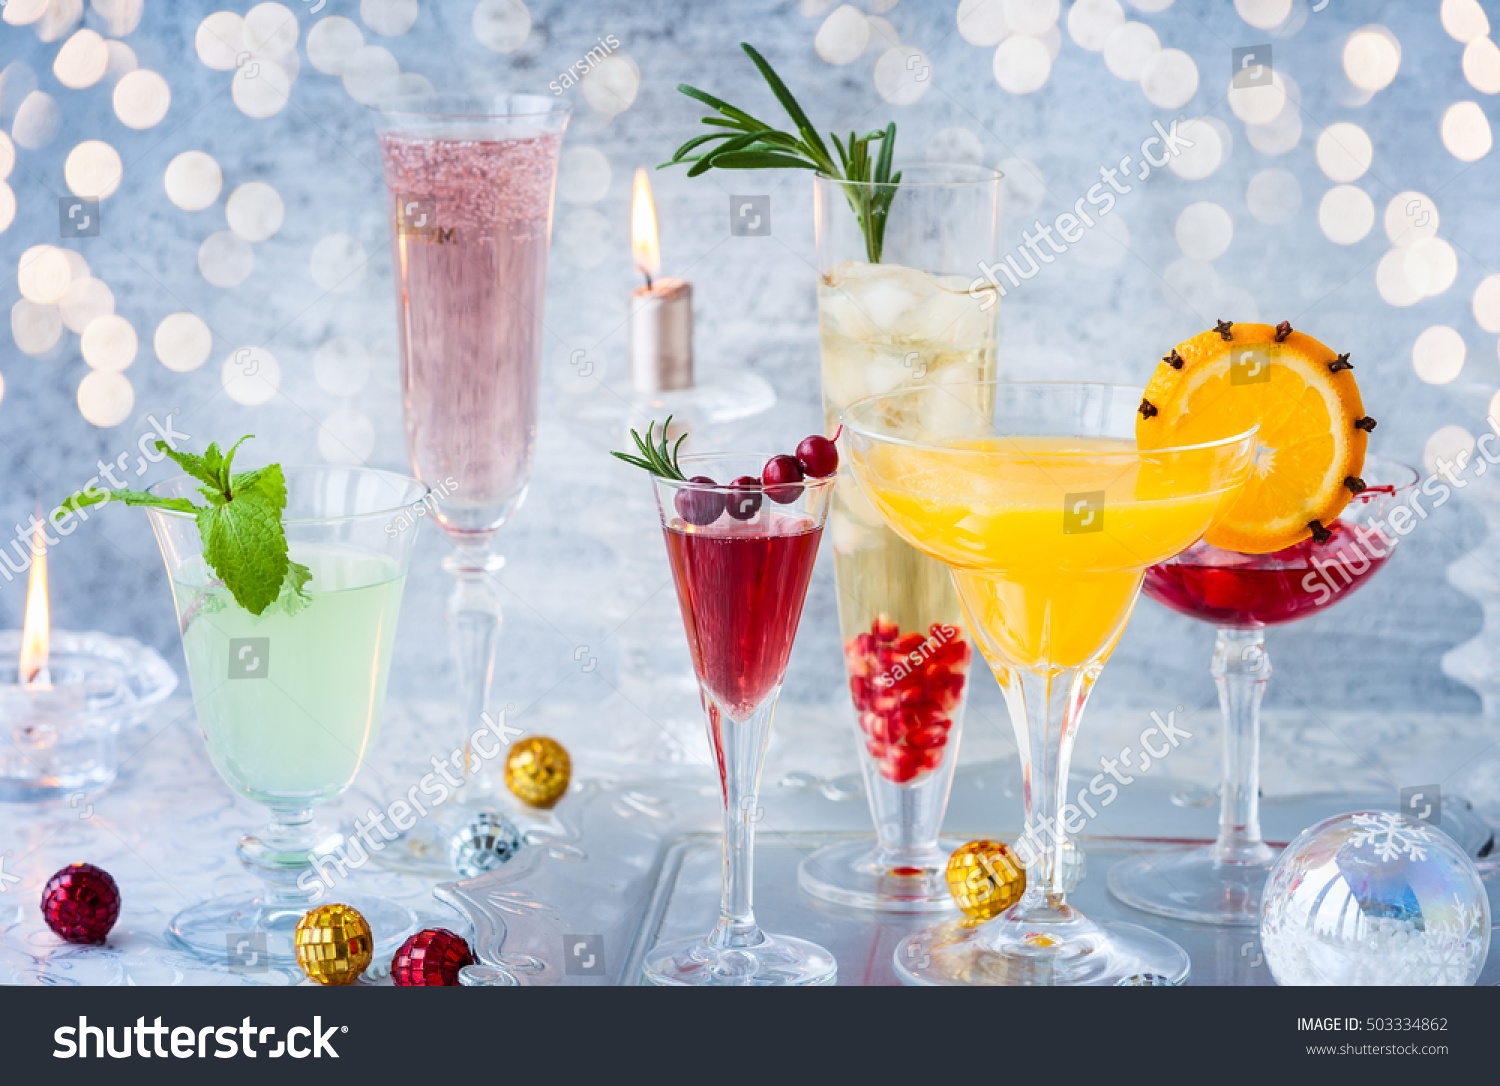 Image result for festive tray of champagne